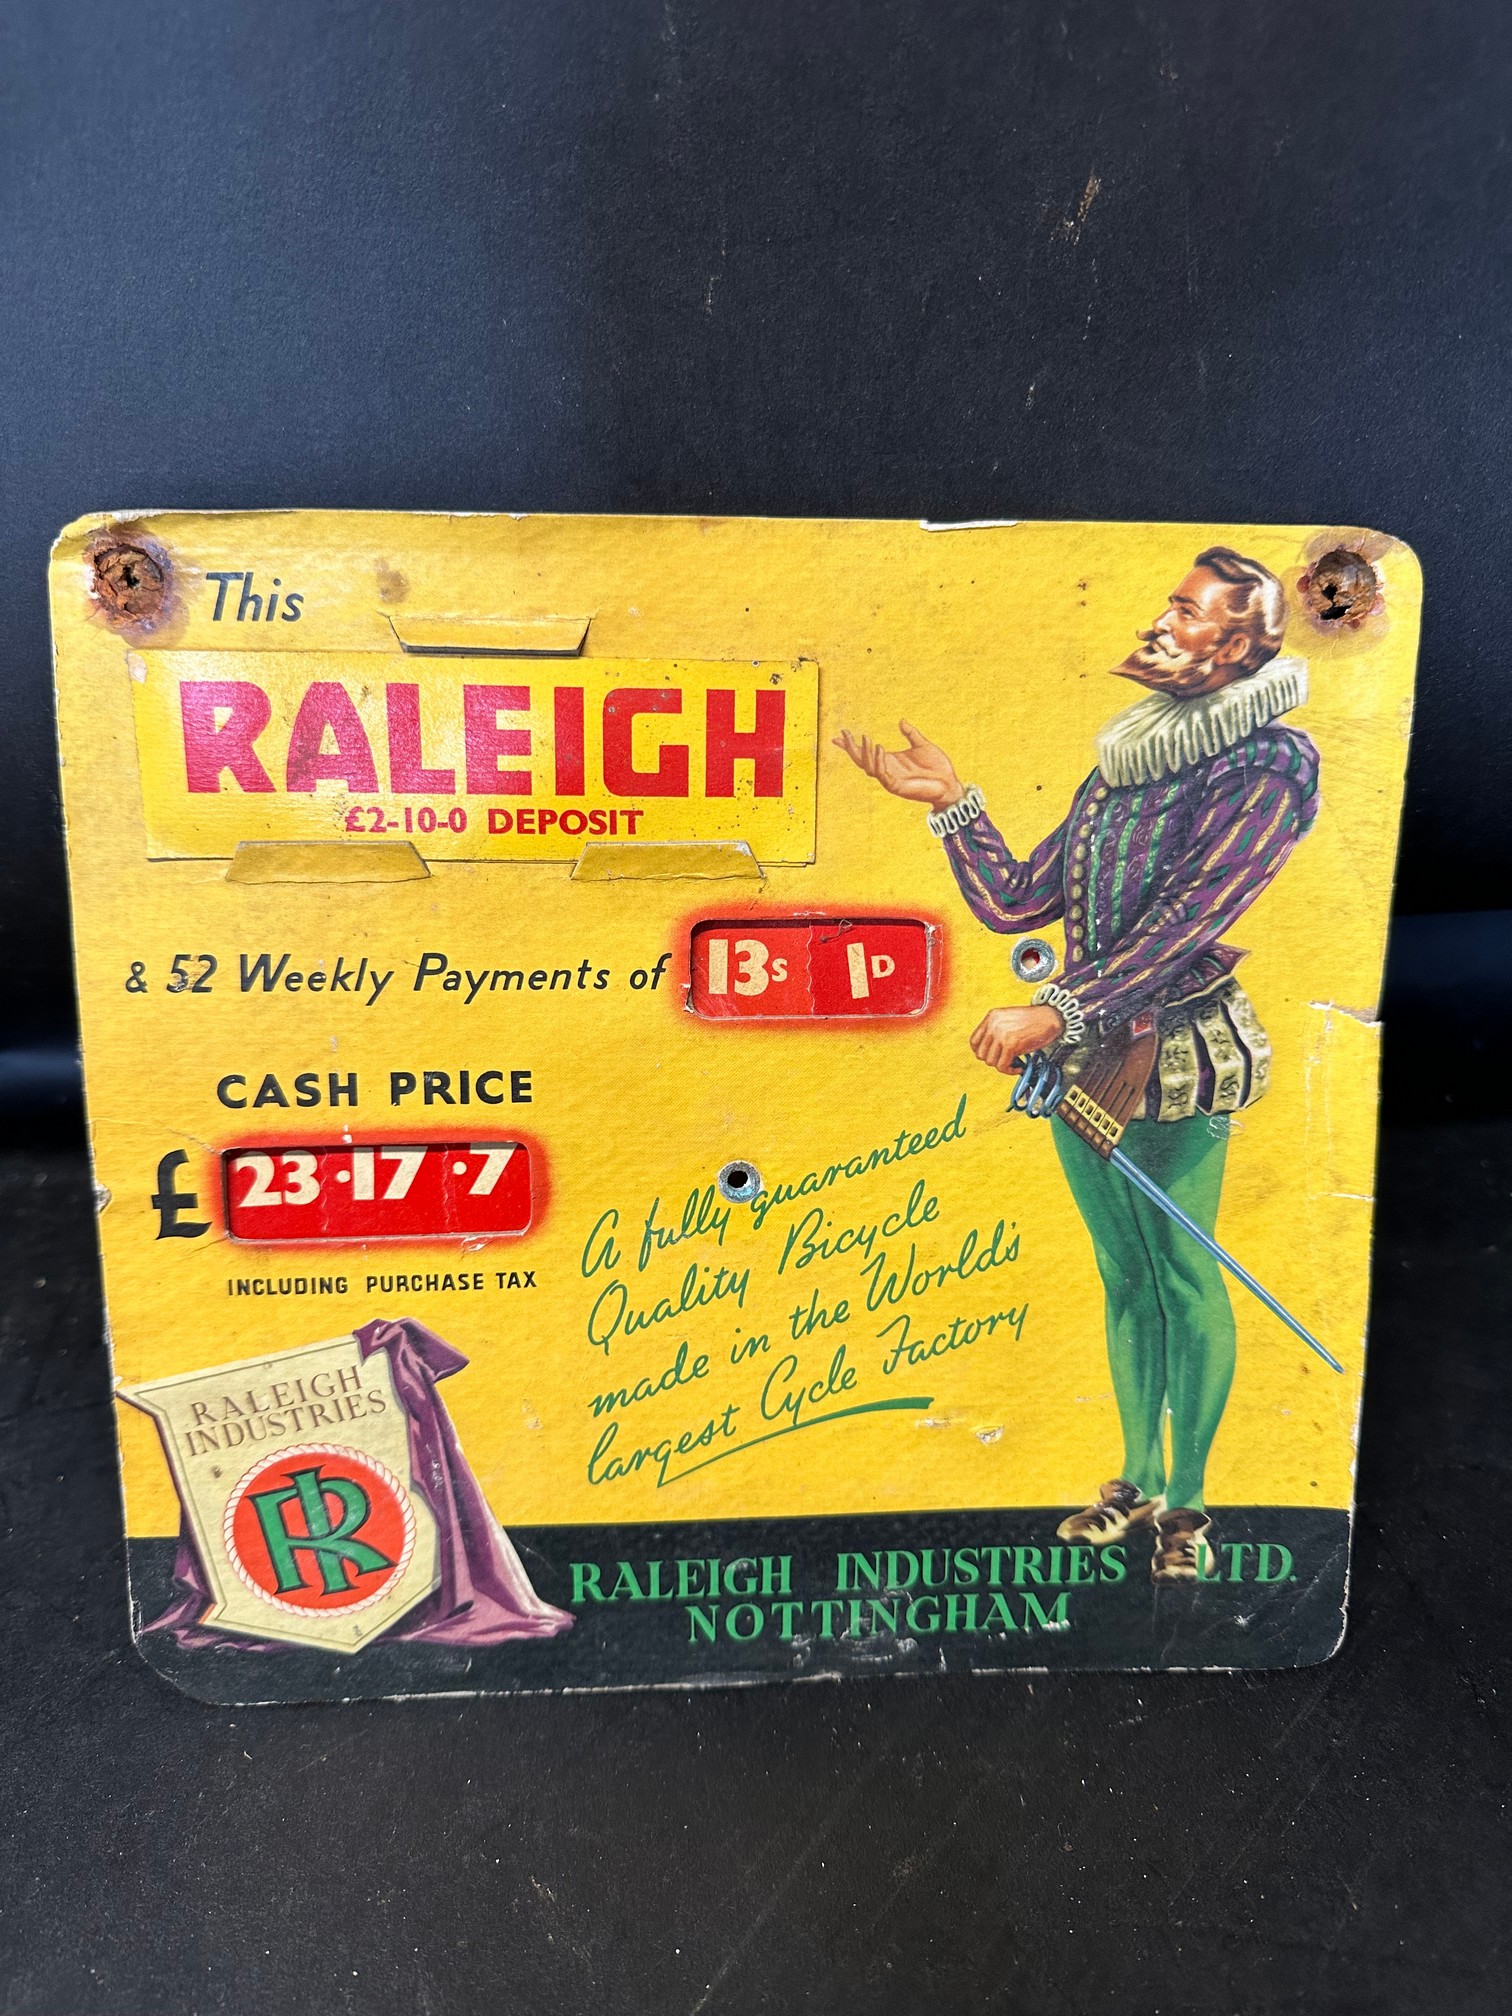 A rare Raleigh Industries Ltd. Nottingham price indicator showcard 'a fully guaranteed Quality